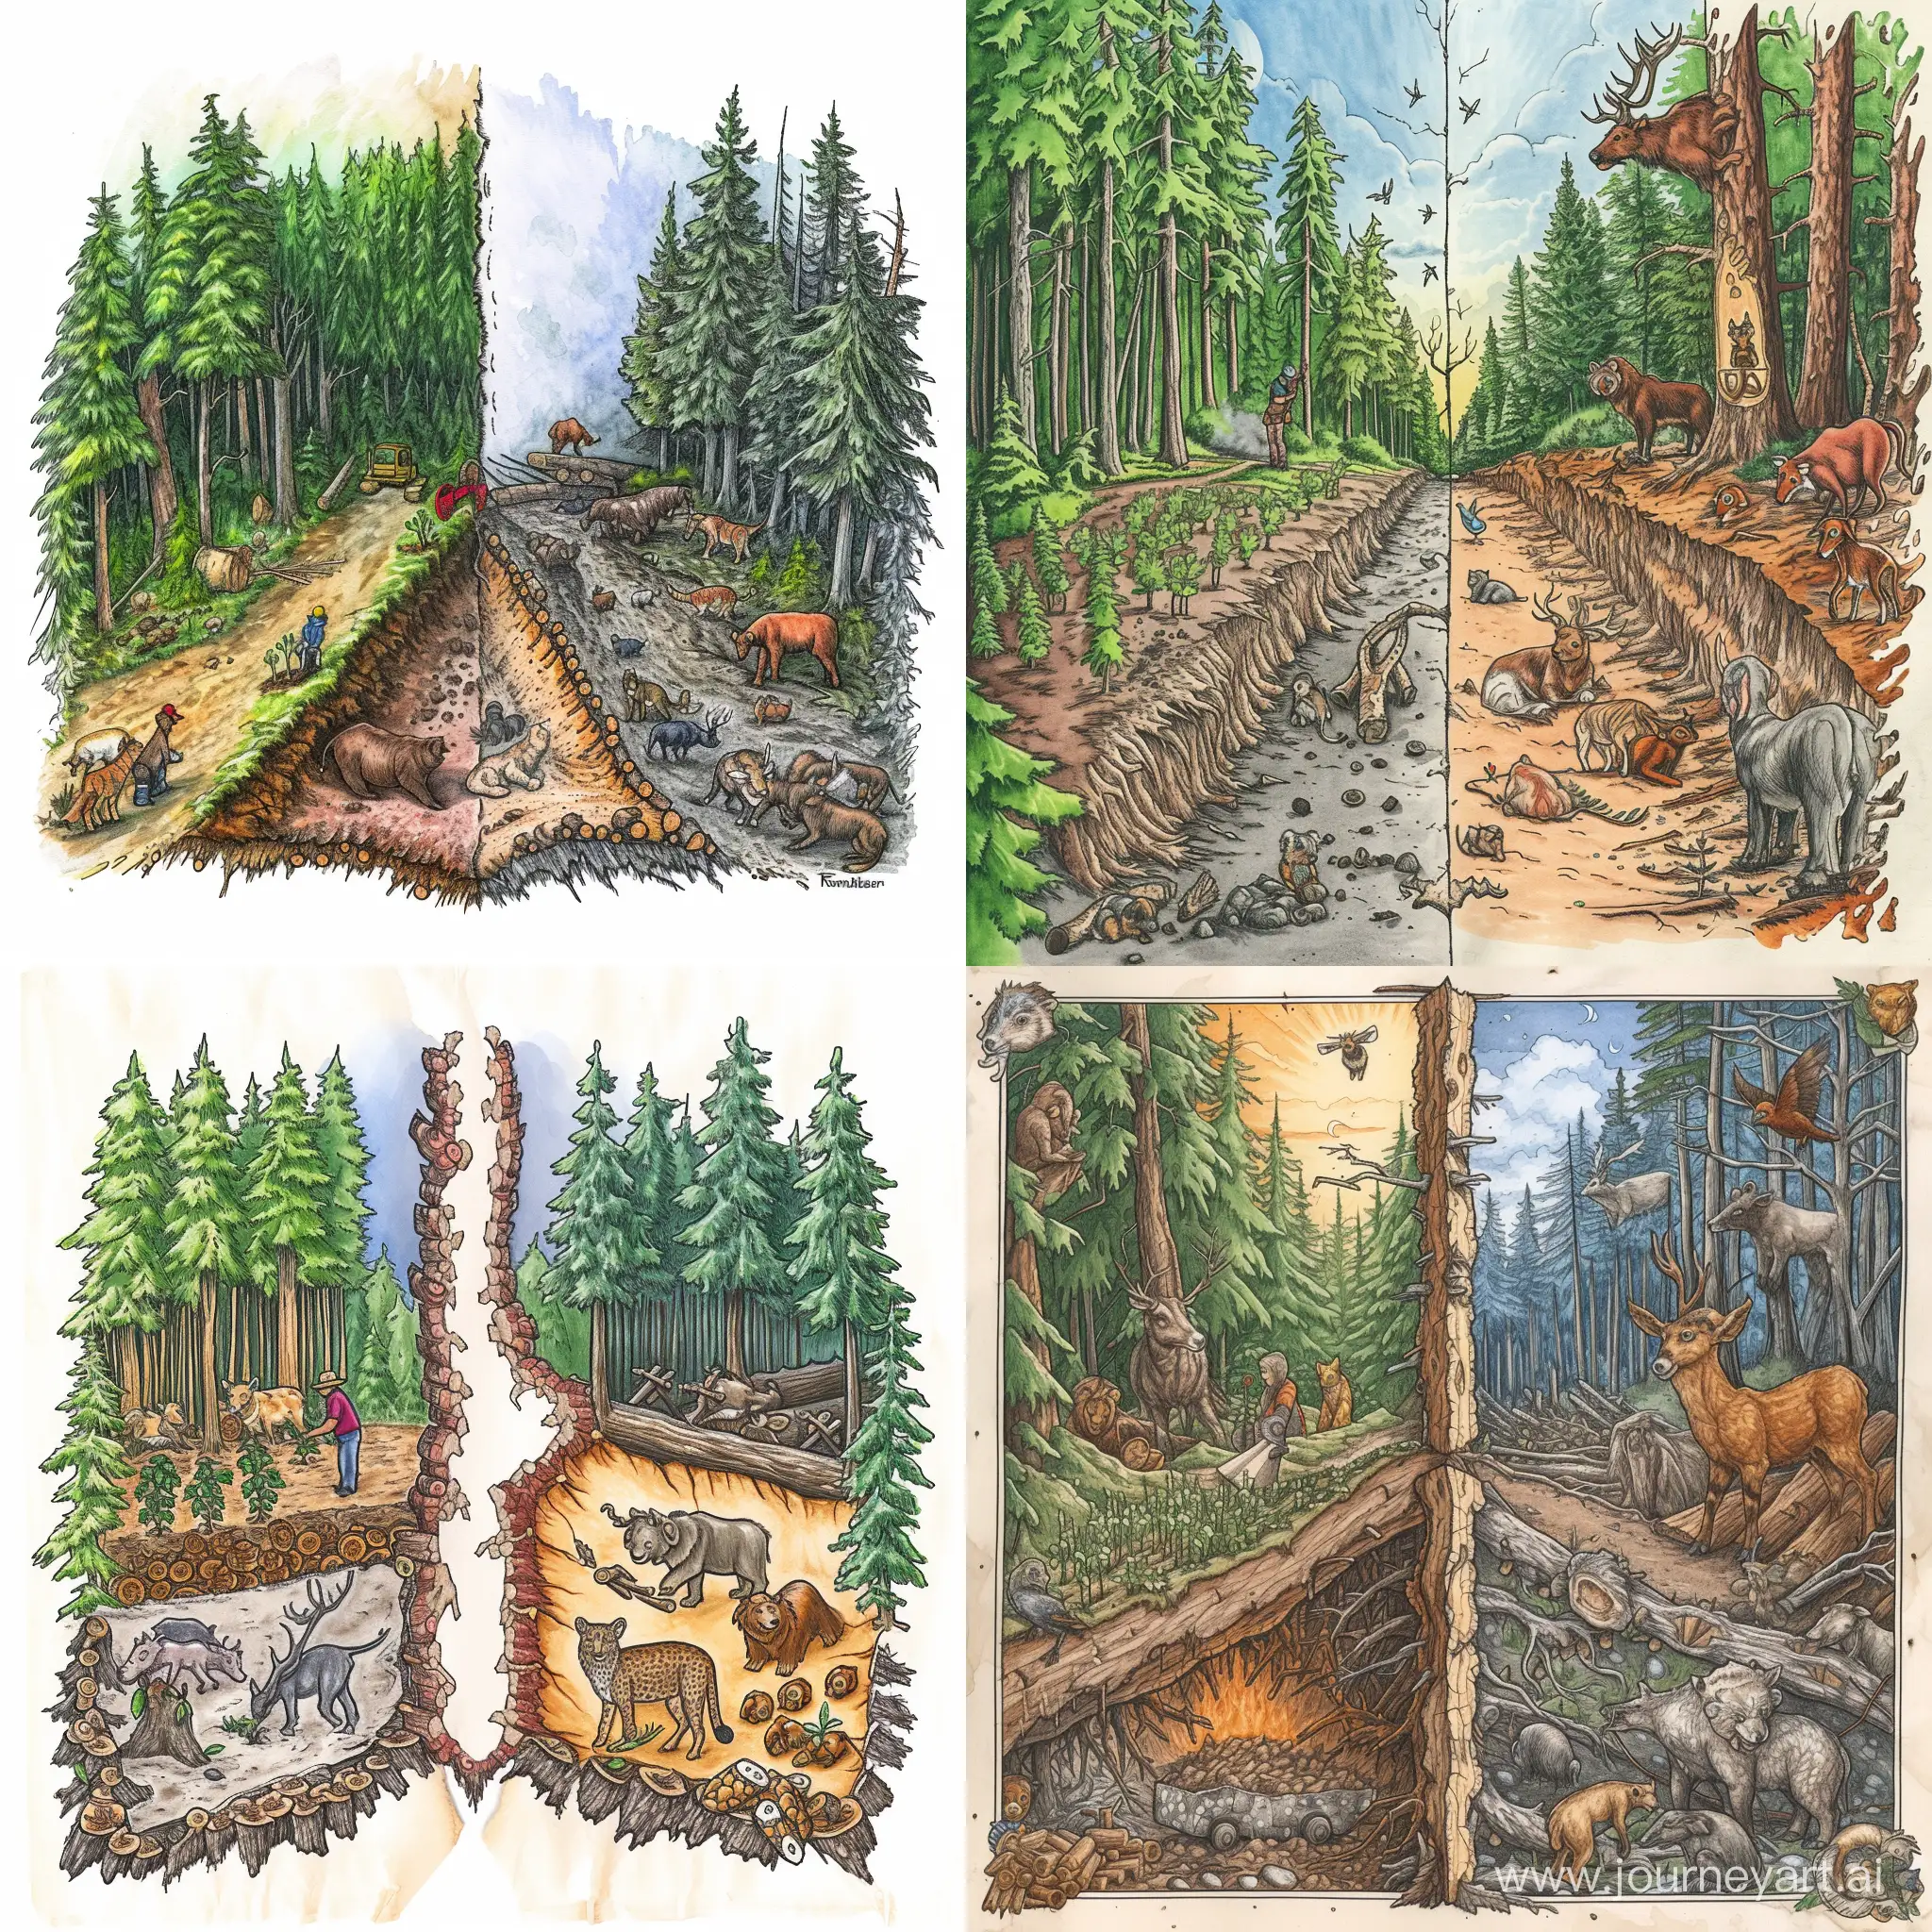 A drawing of a logging company, a forest should be depicted in the background, on the left side a person is planting tree seedlings, and on the right side there are animals that live in this forest, and in the center the left and right parts are separated by logging materials, the drawing should be realistic and bright